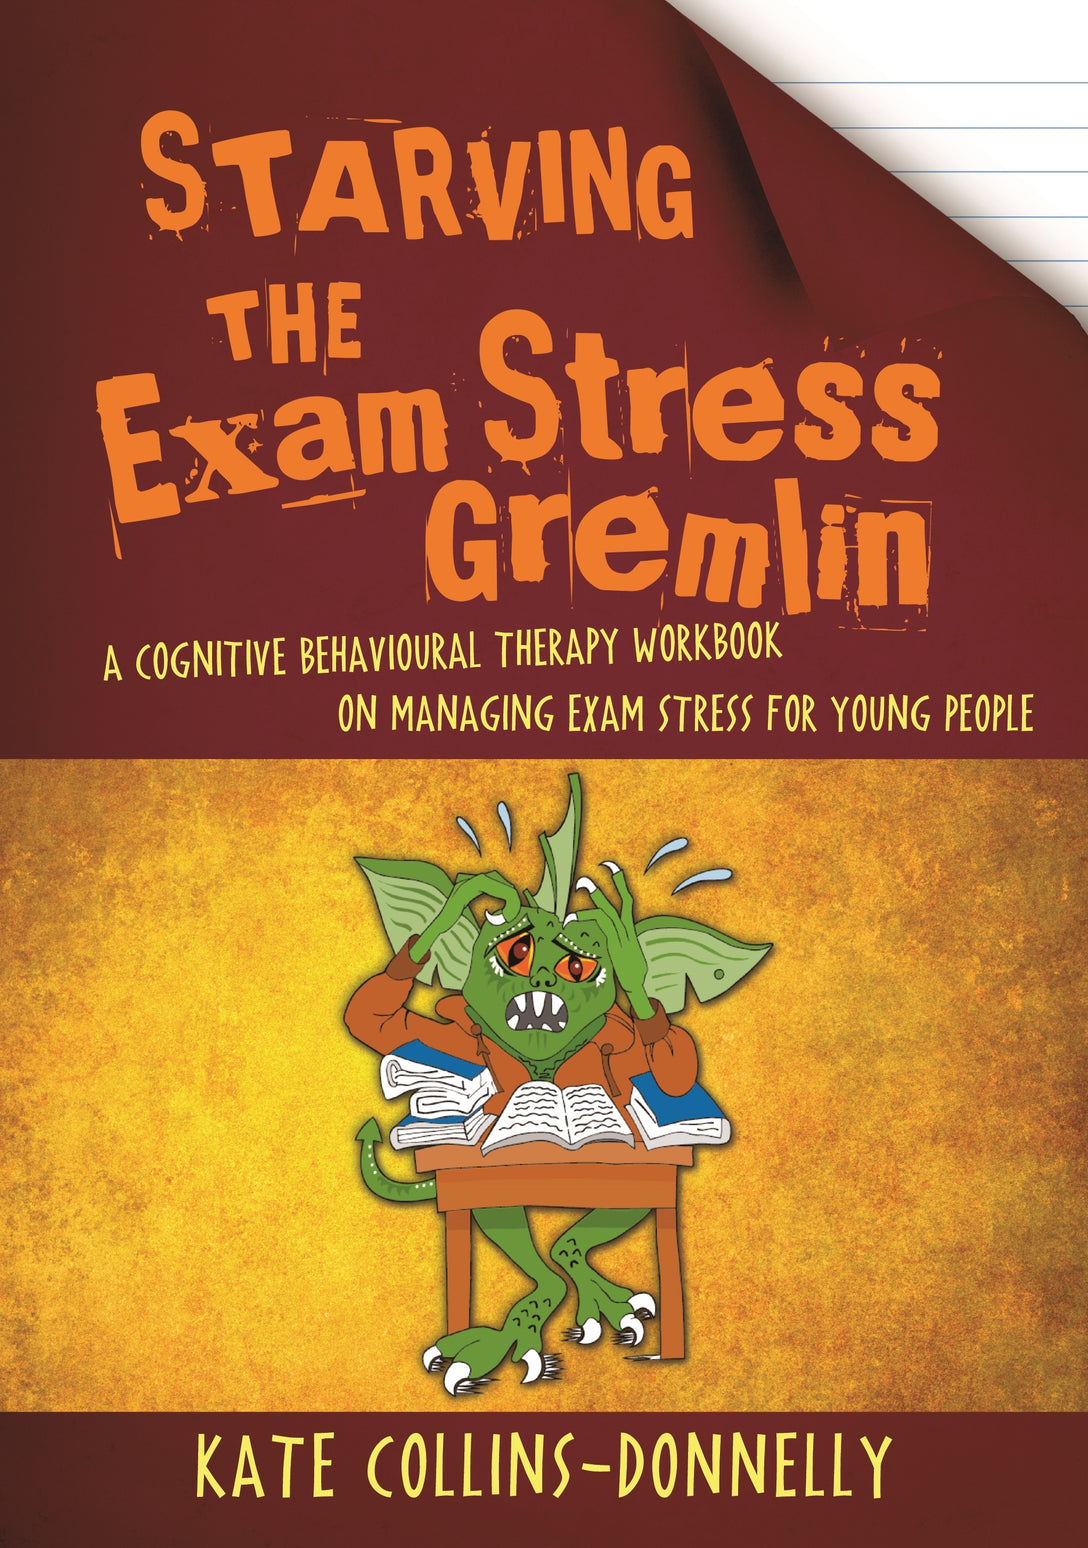 Starving the Exam Stress Gremlin by Kate Collins-Donnelly